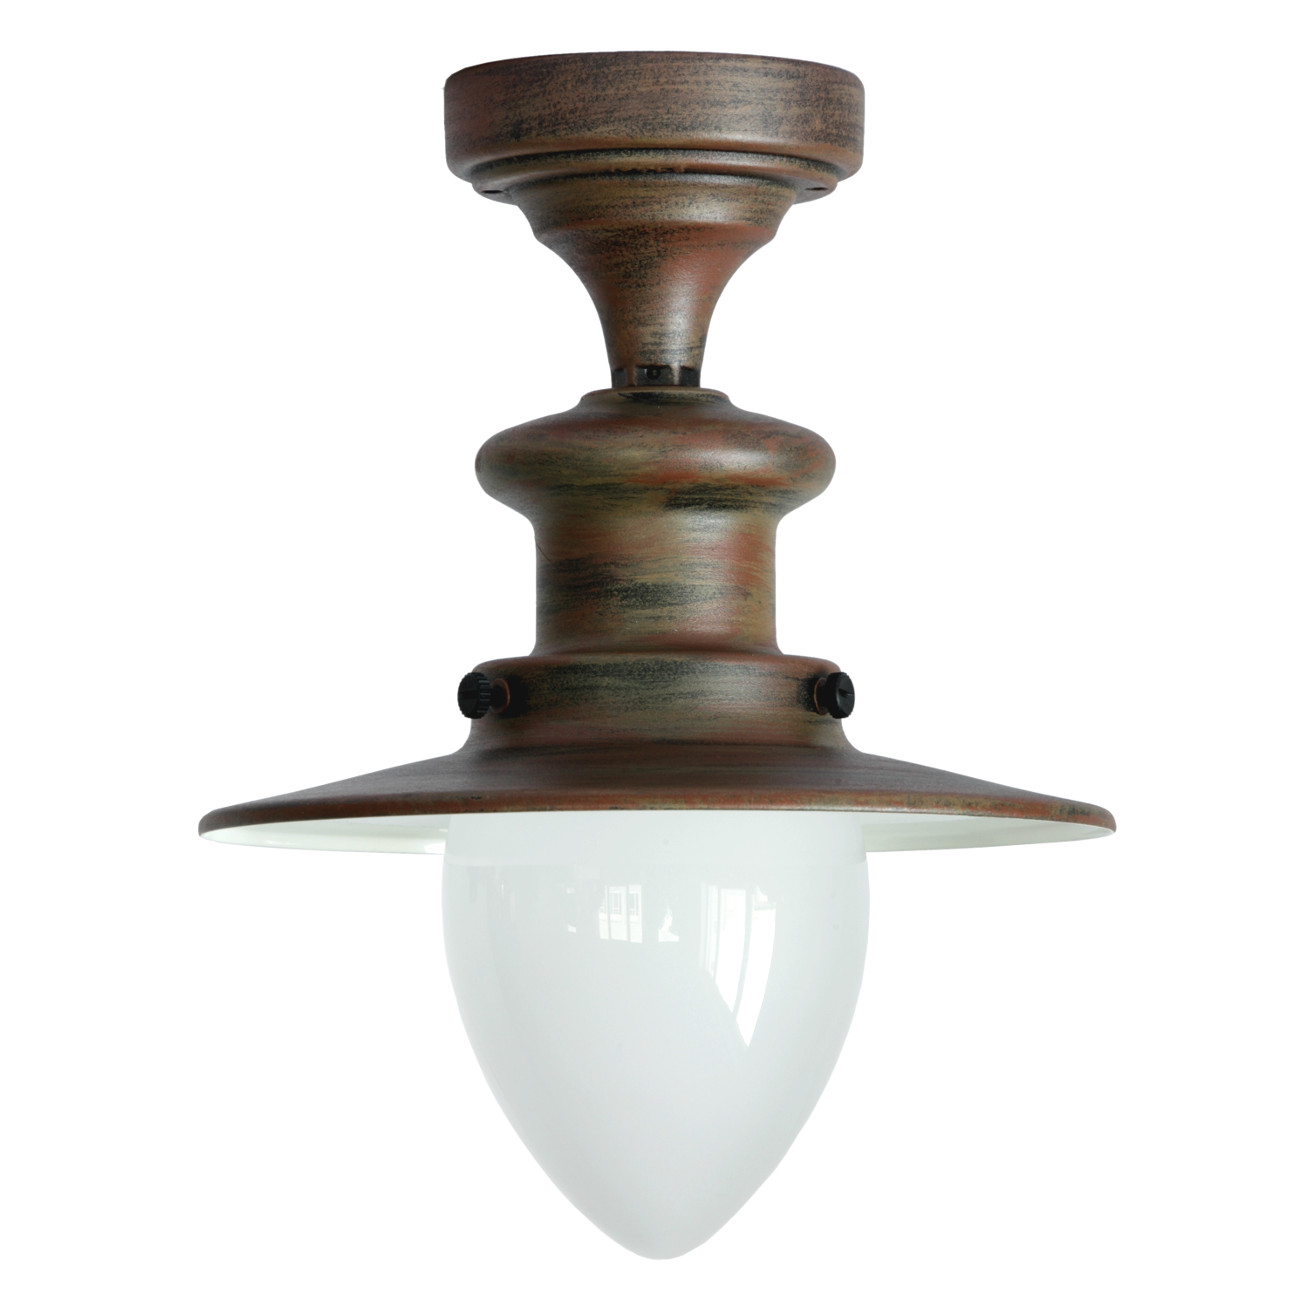 Factory-style Outdoor Ceiling Light with Real Glass